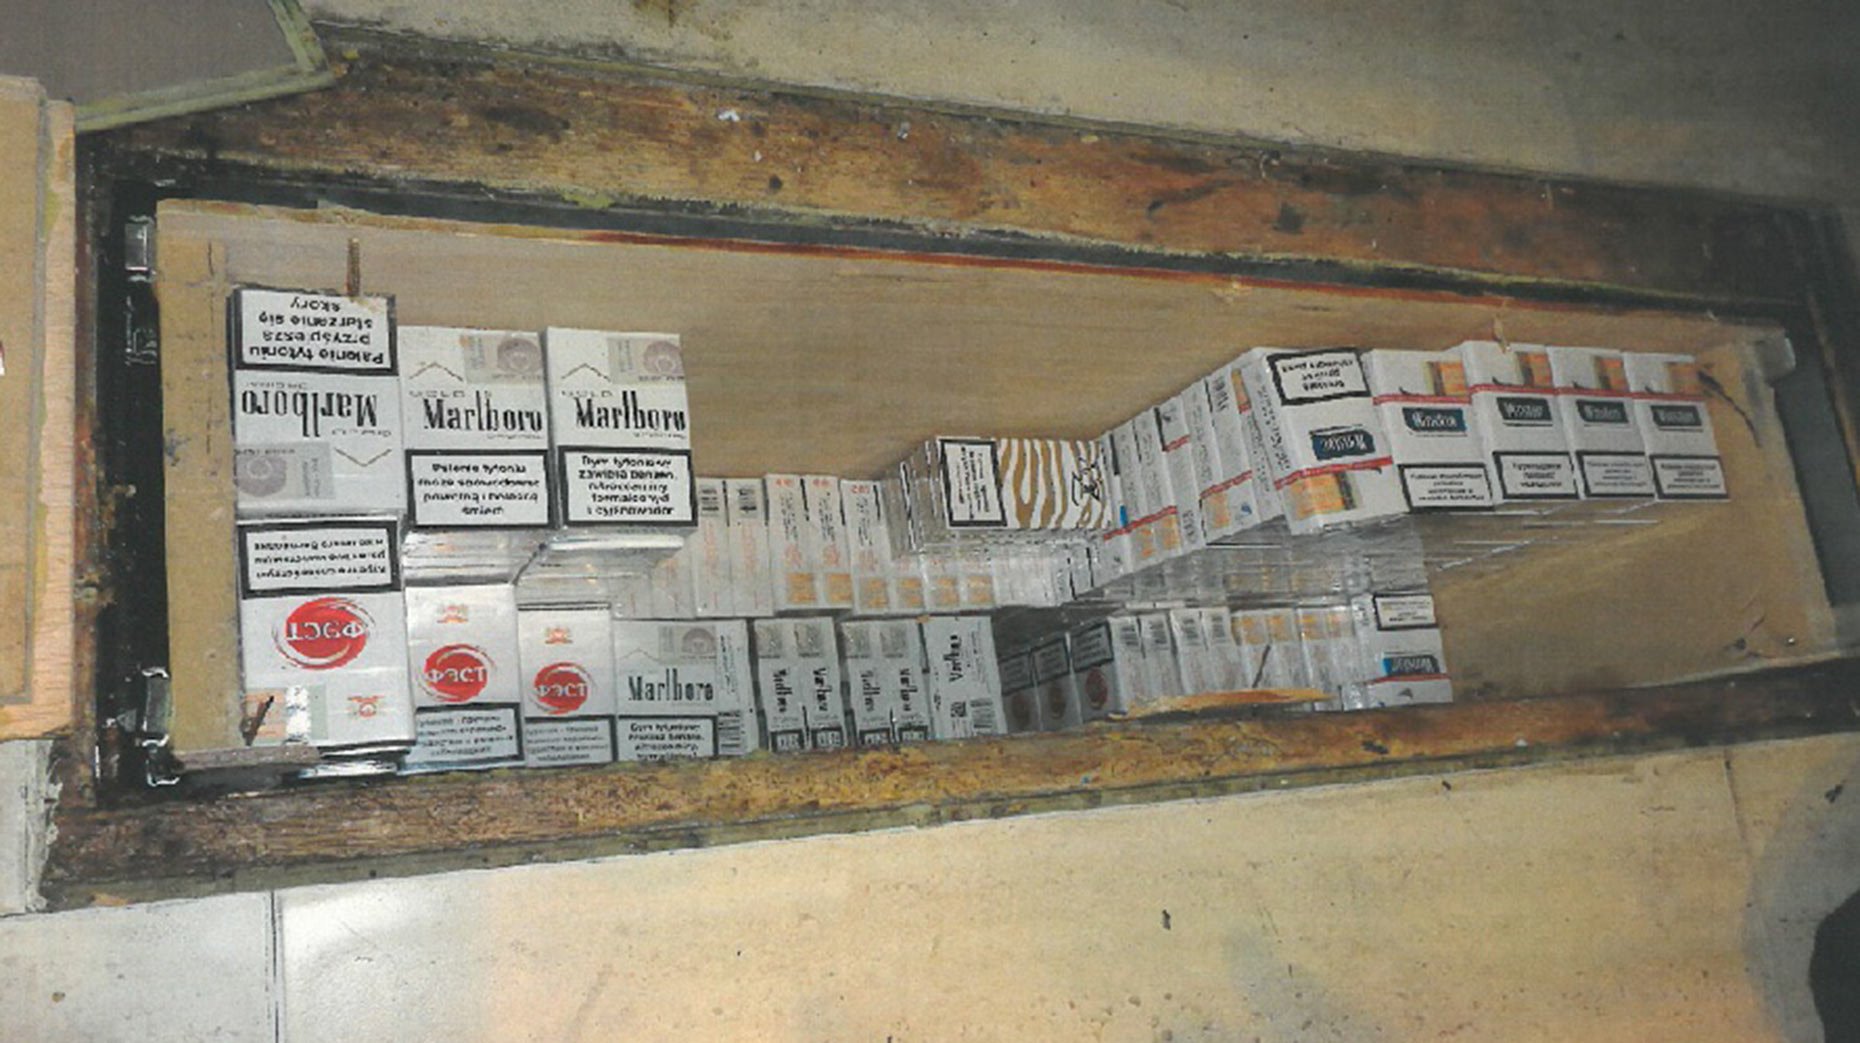 Around 400 packets of cigarettes were discovered in an underground bunker in the Lincoln shop.